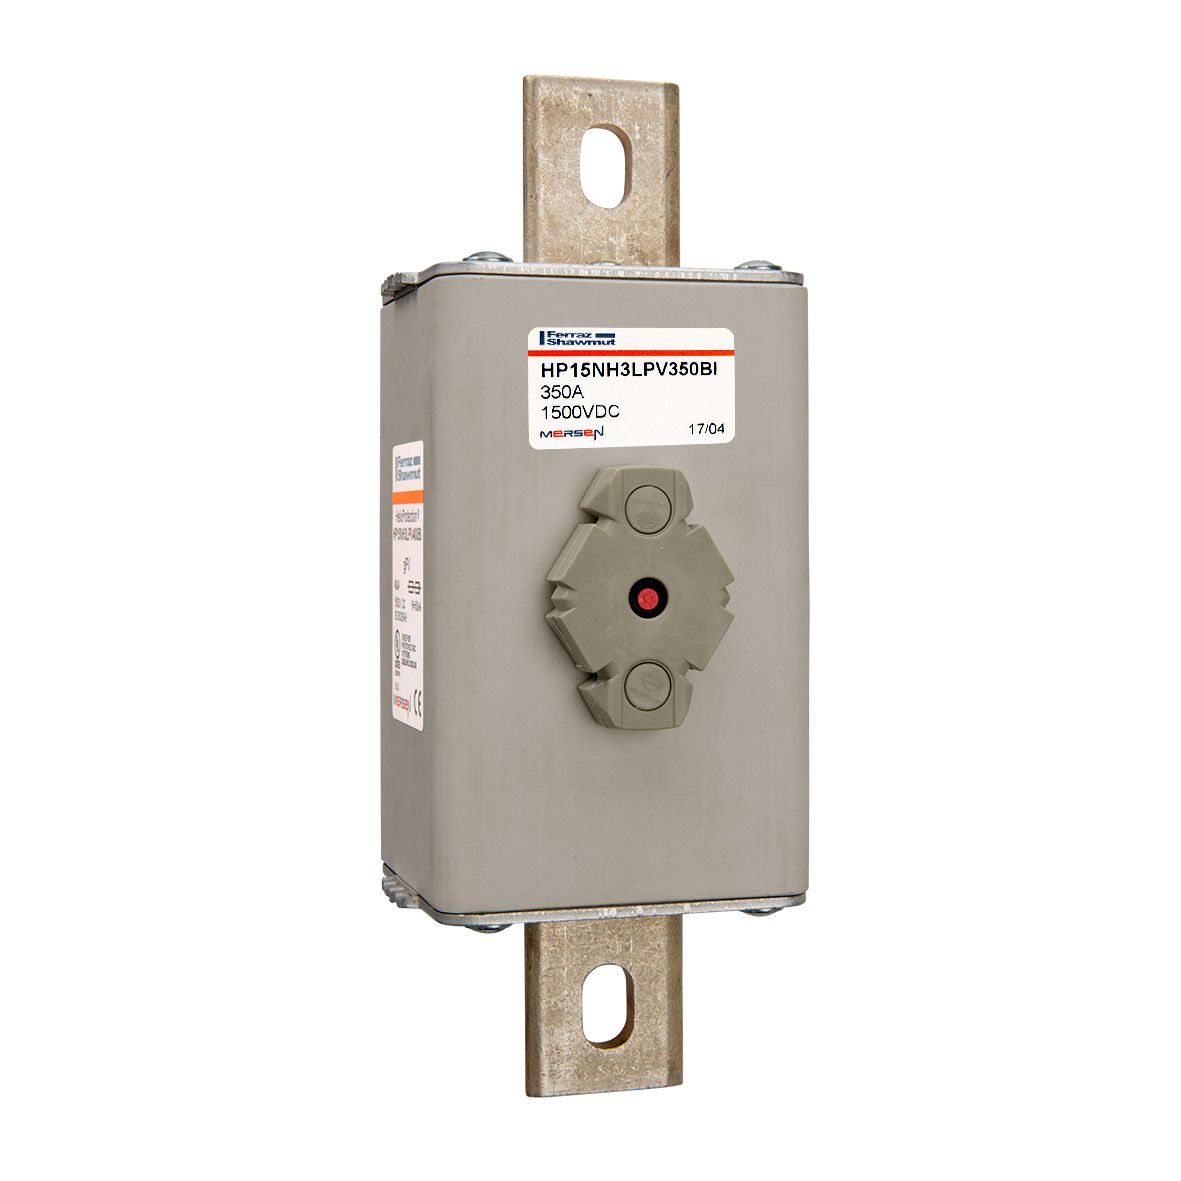 E1057222 - NH fuse-link gPV, 1500VDC, size 3L, 350A, for direct mounting, with striker